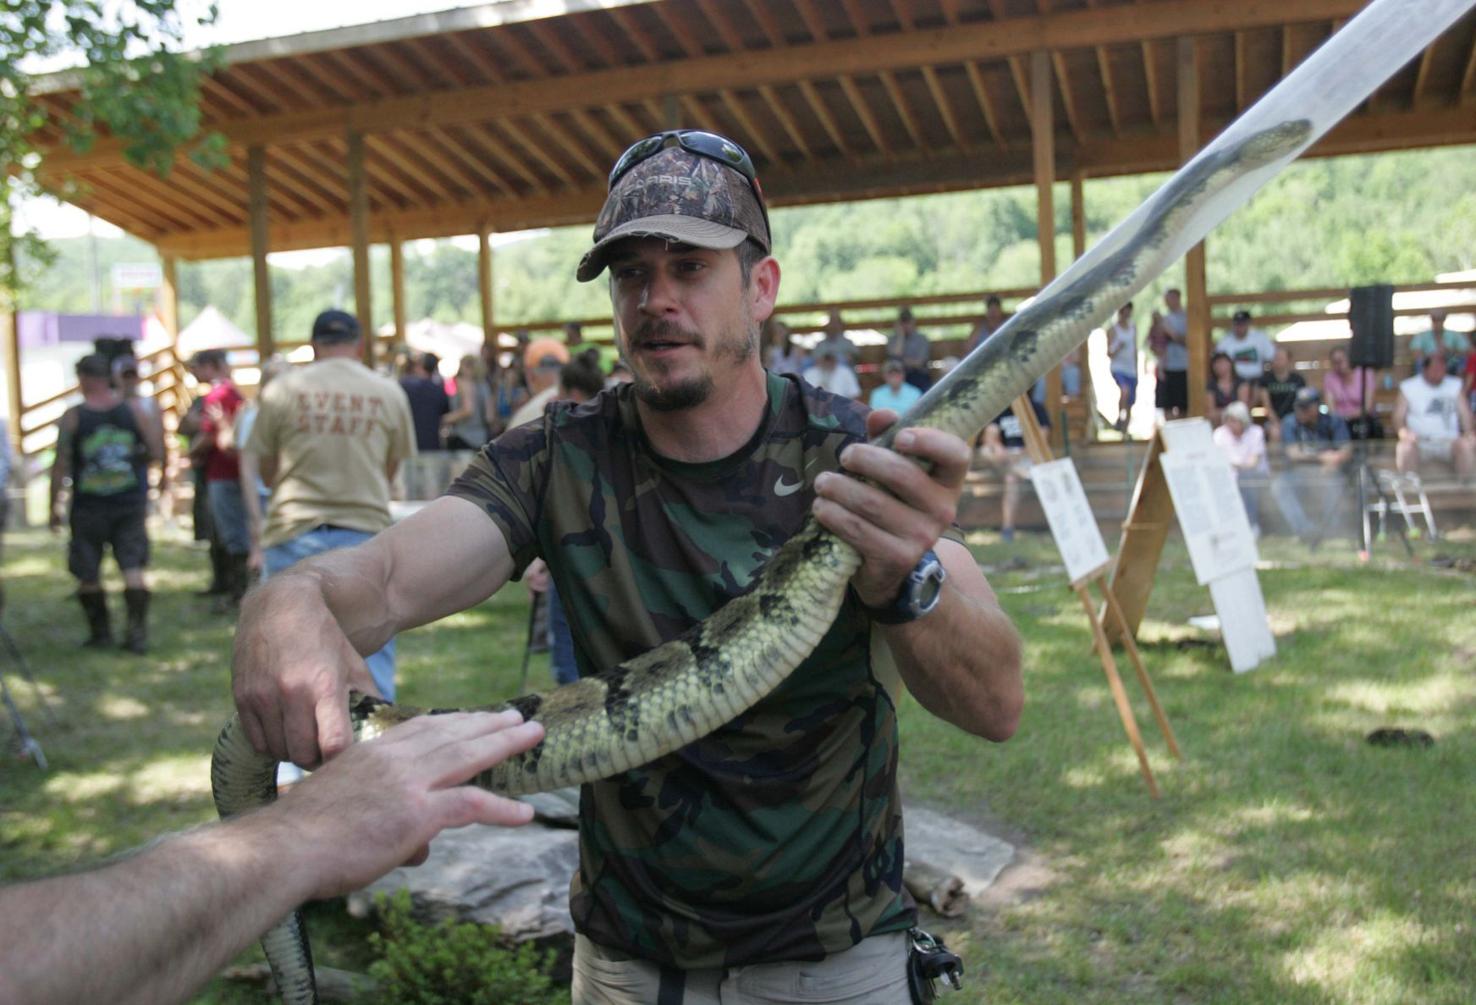 Yearly Pa. rattlesnake roundup event yields dozens of serpents State